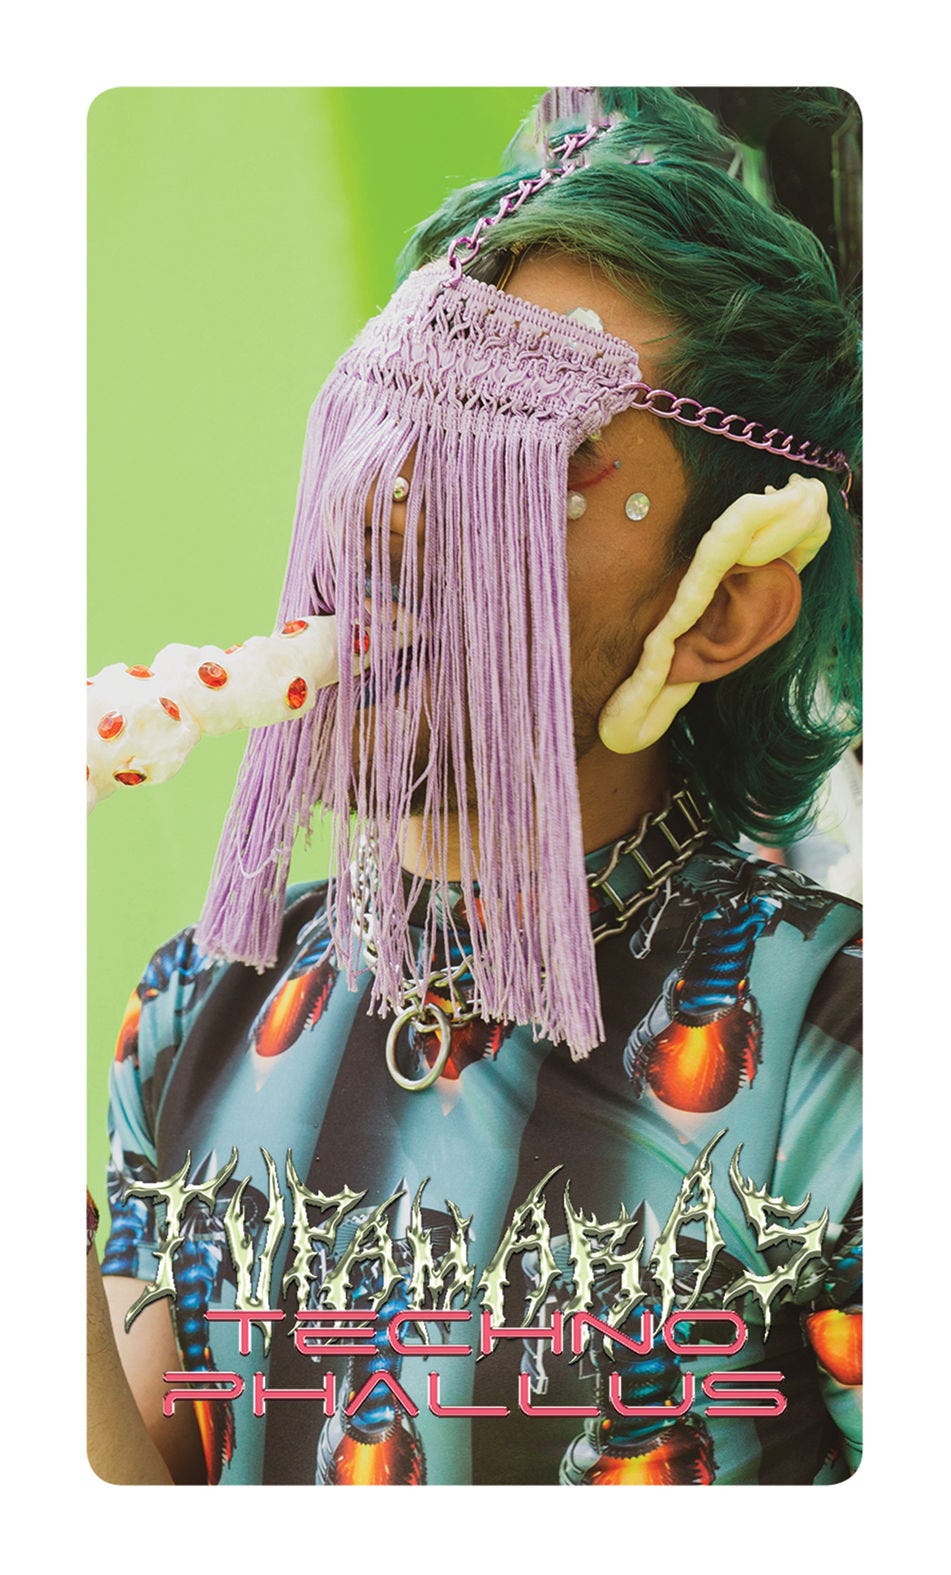 person with green hair, accessories, purple mask with fringe